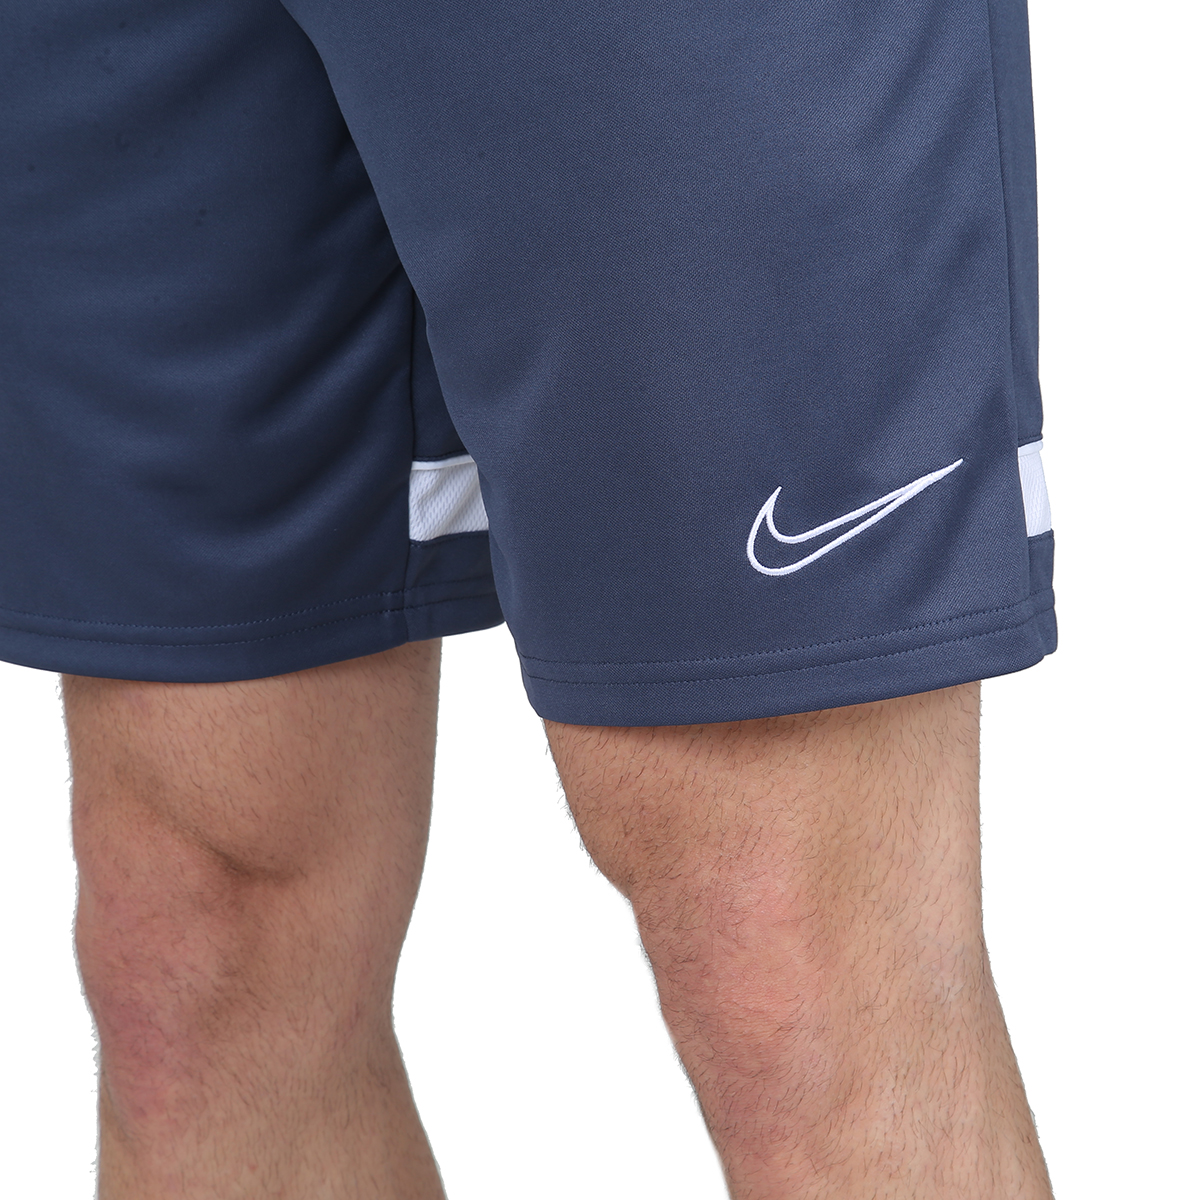 Short Fútbol Nike Dri-Fit Academy Hombre,  image number null